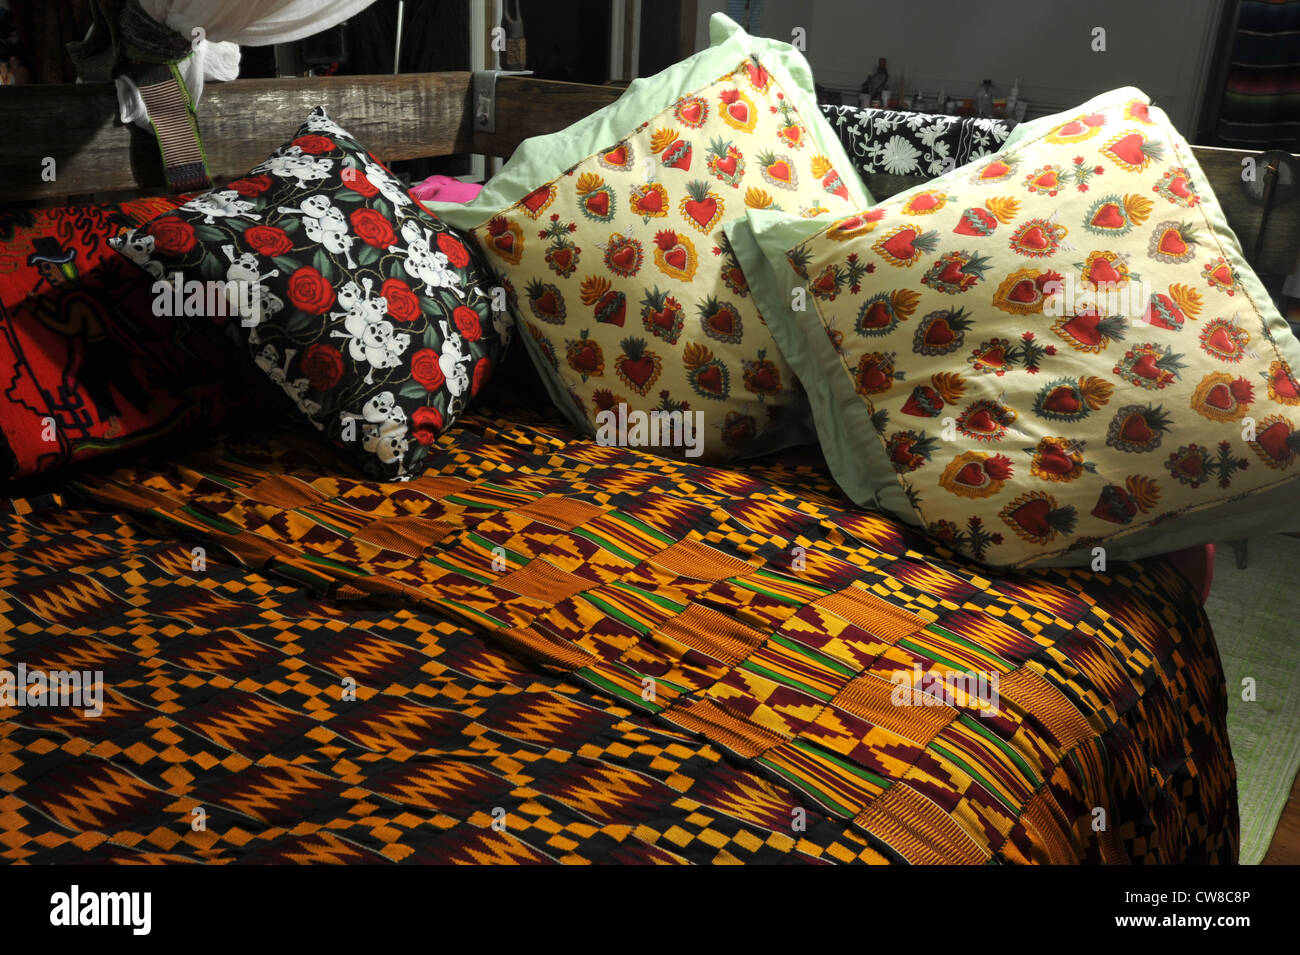 Stylish textiles used for bedroom decoration Stock Photo